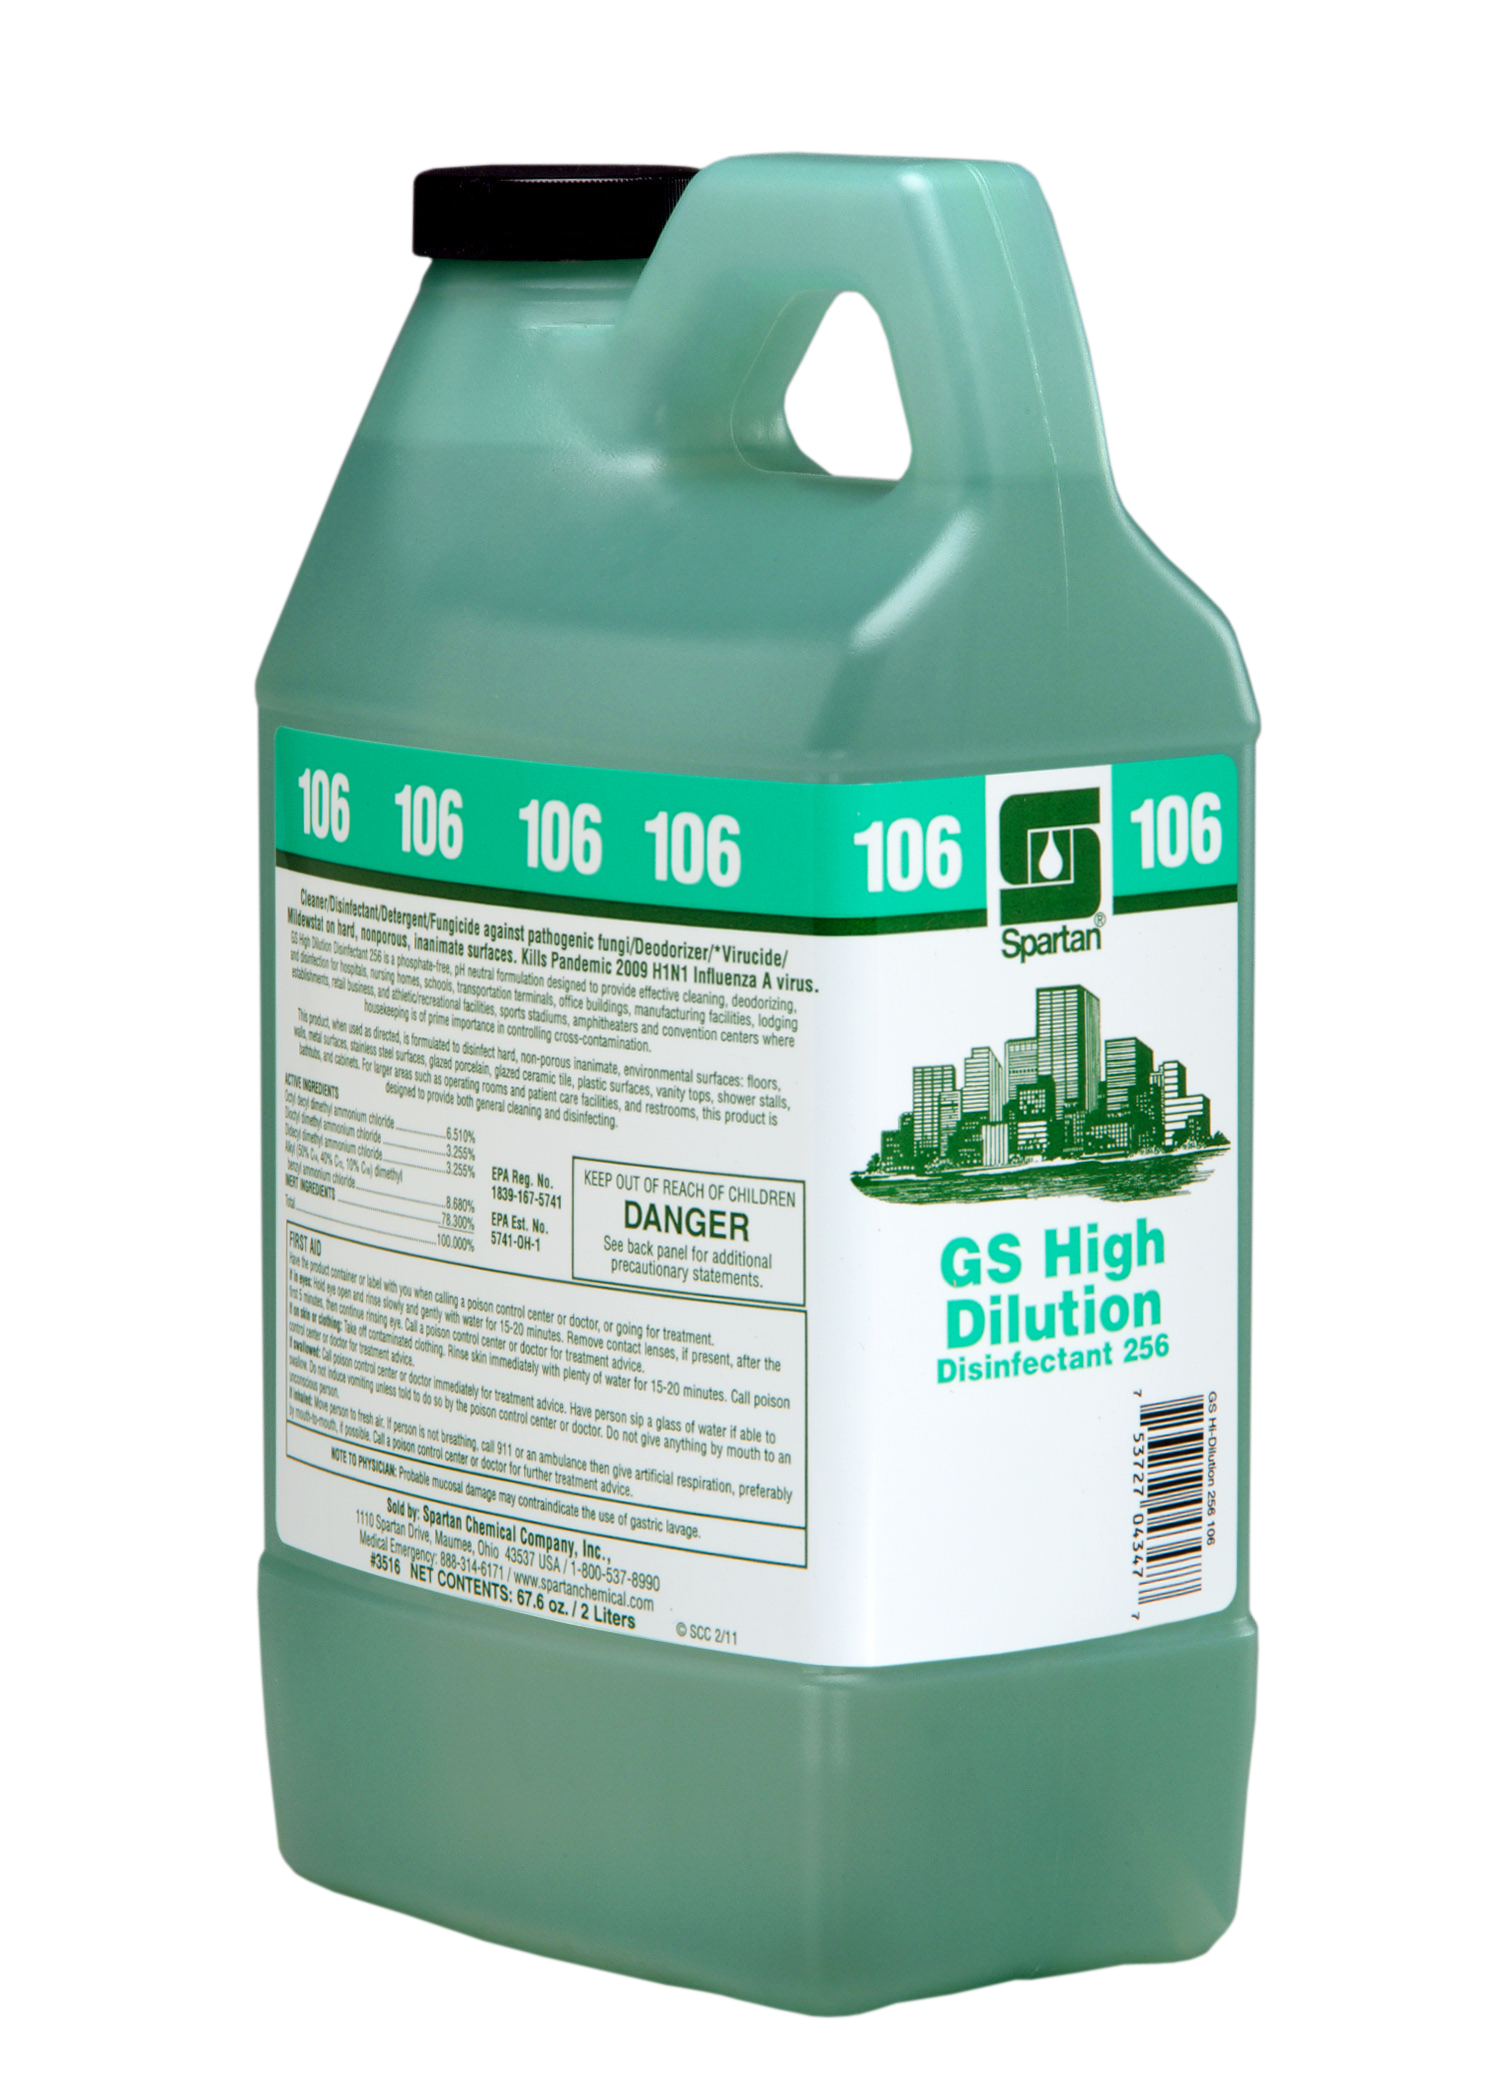 GS High Dilution Disinfectant® 256 106 2 liter (4 per case)